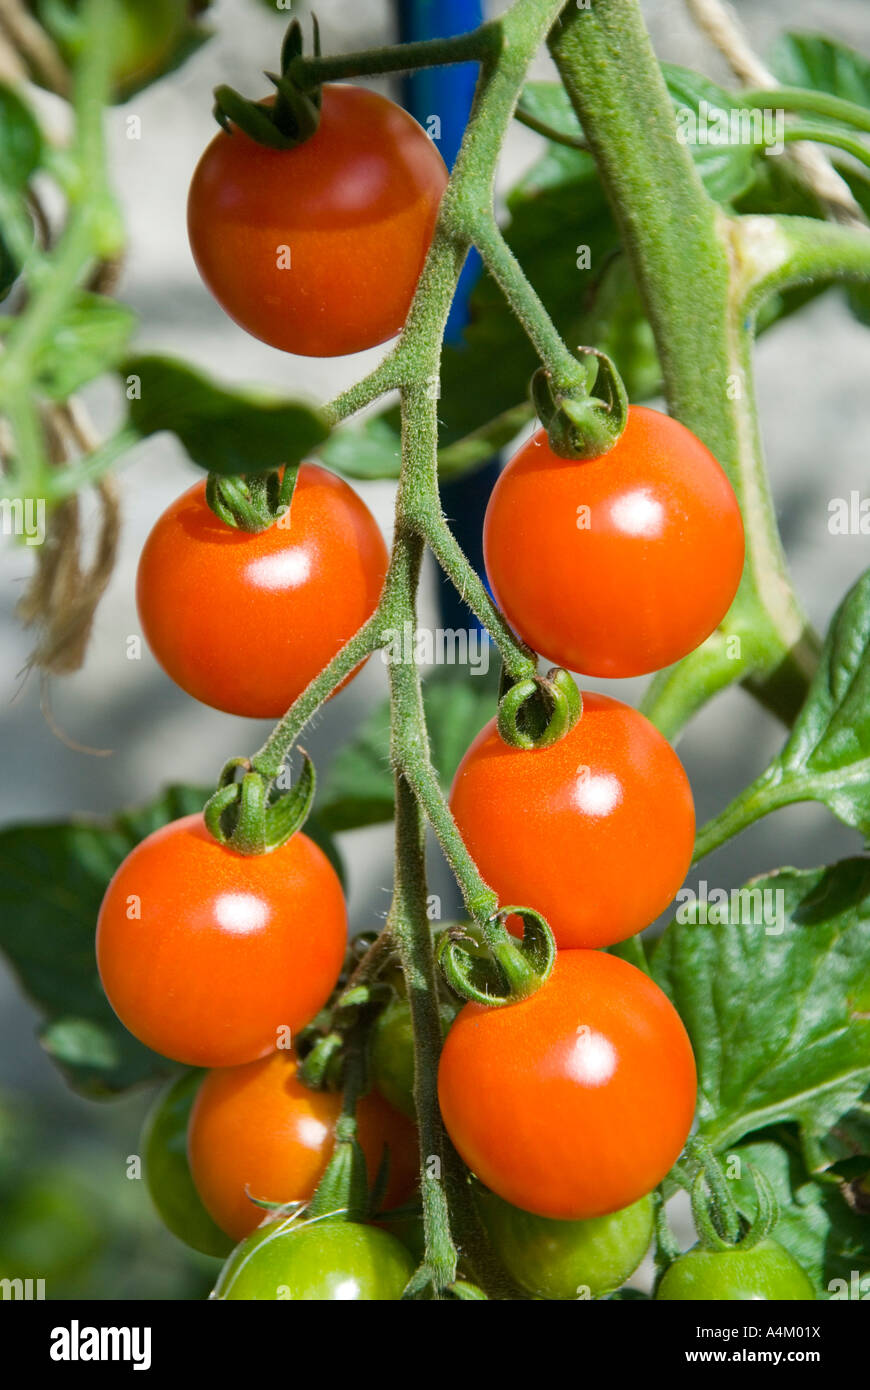 A cluster of Sweet Bite tomatoes ripening on the vine Stock Photo